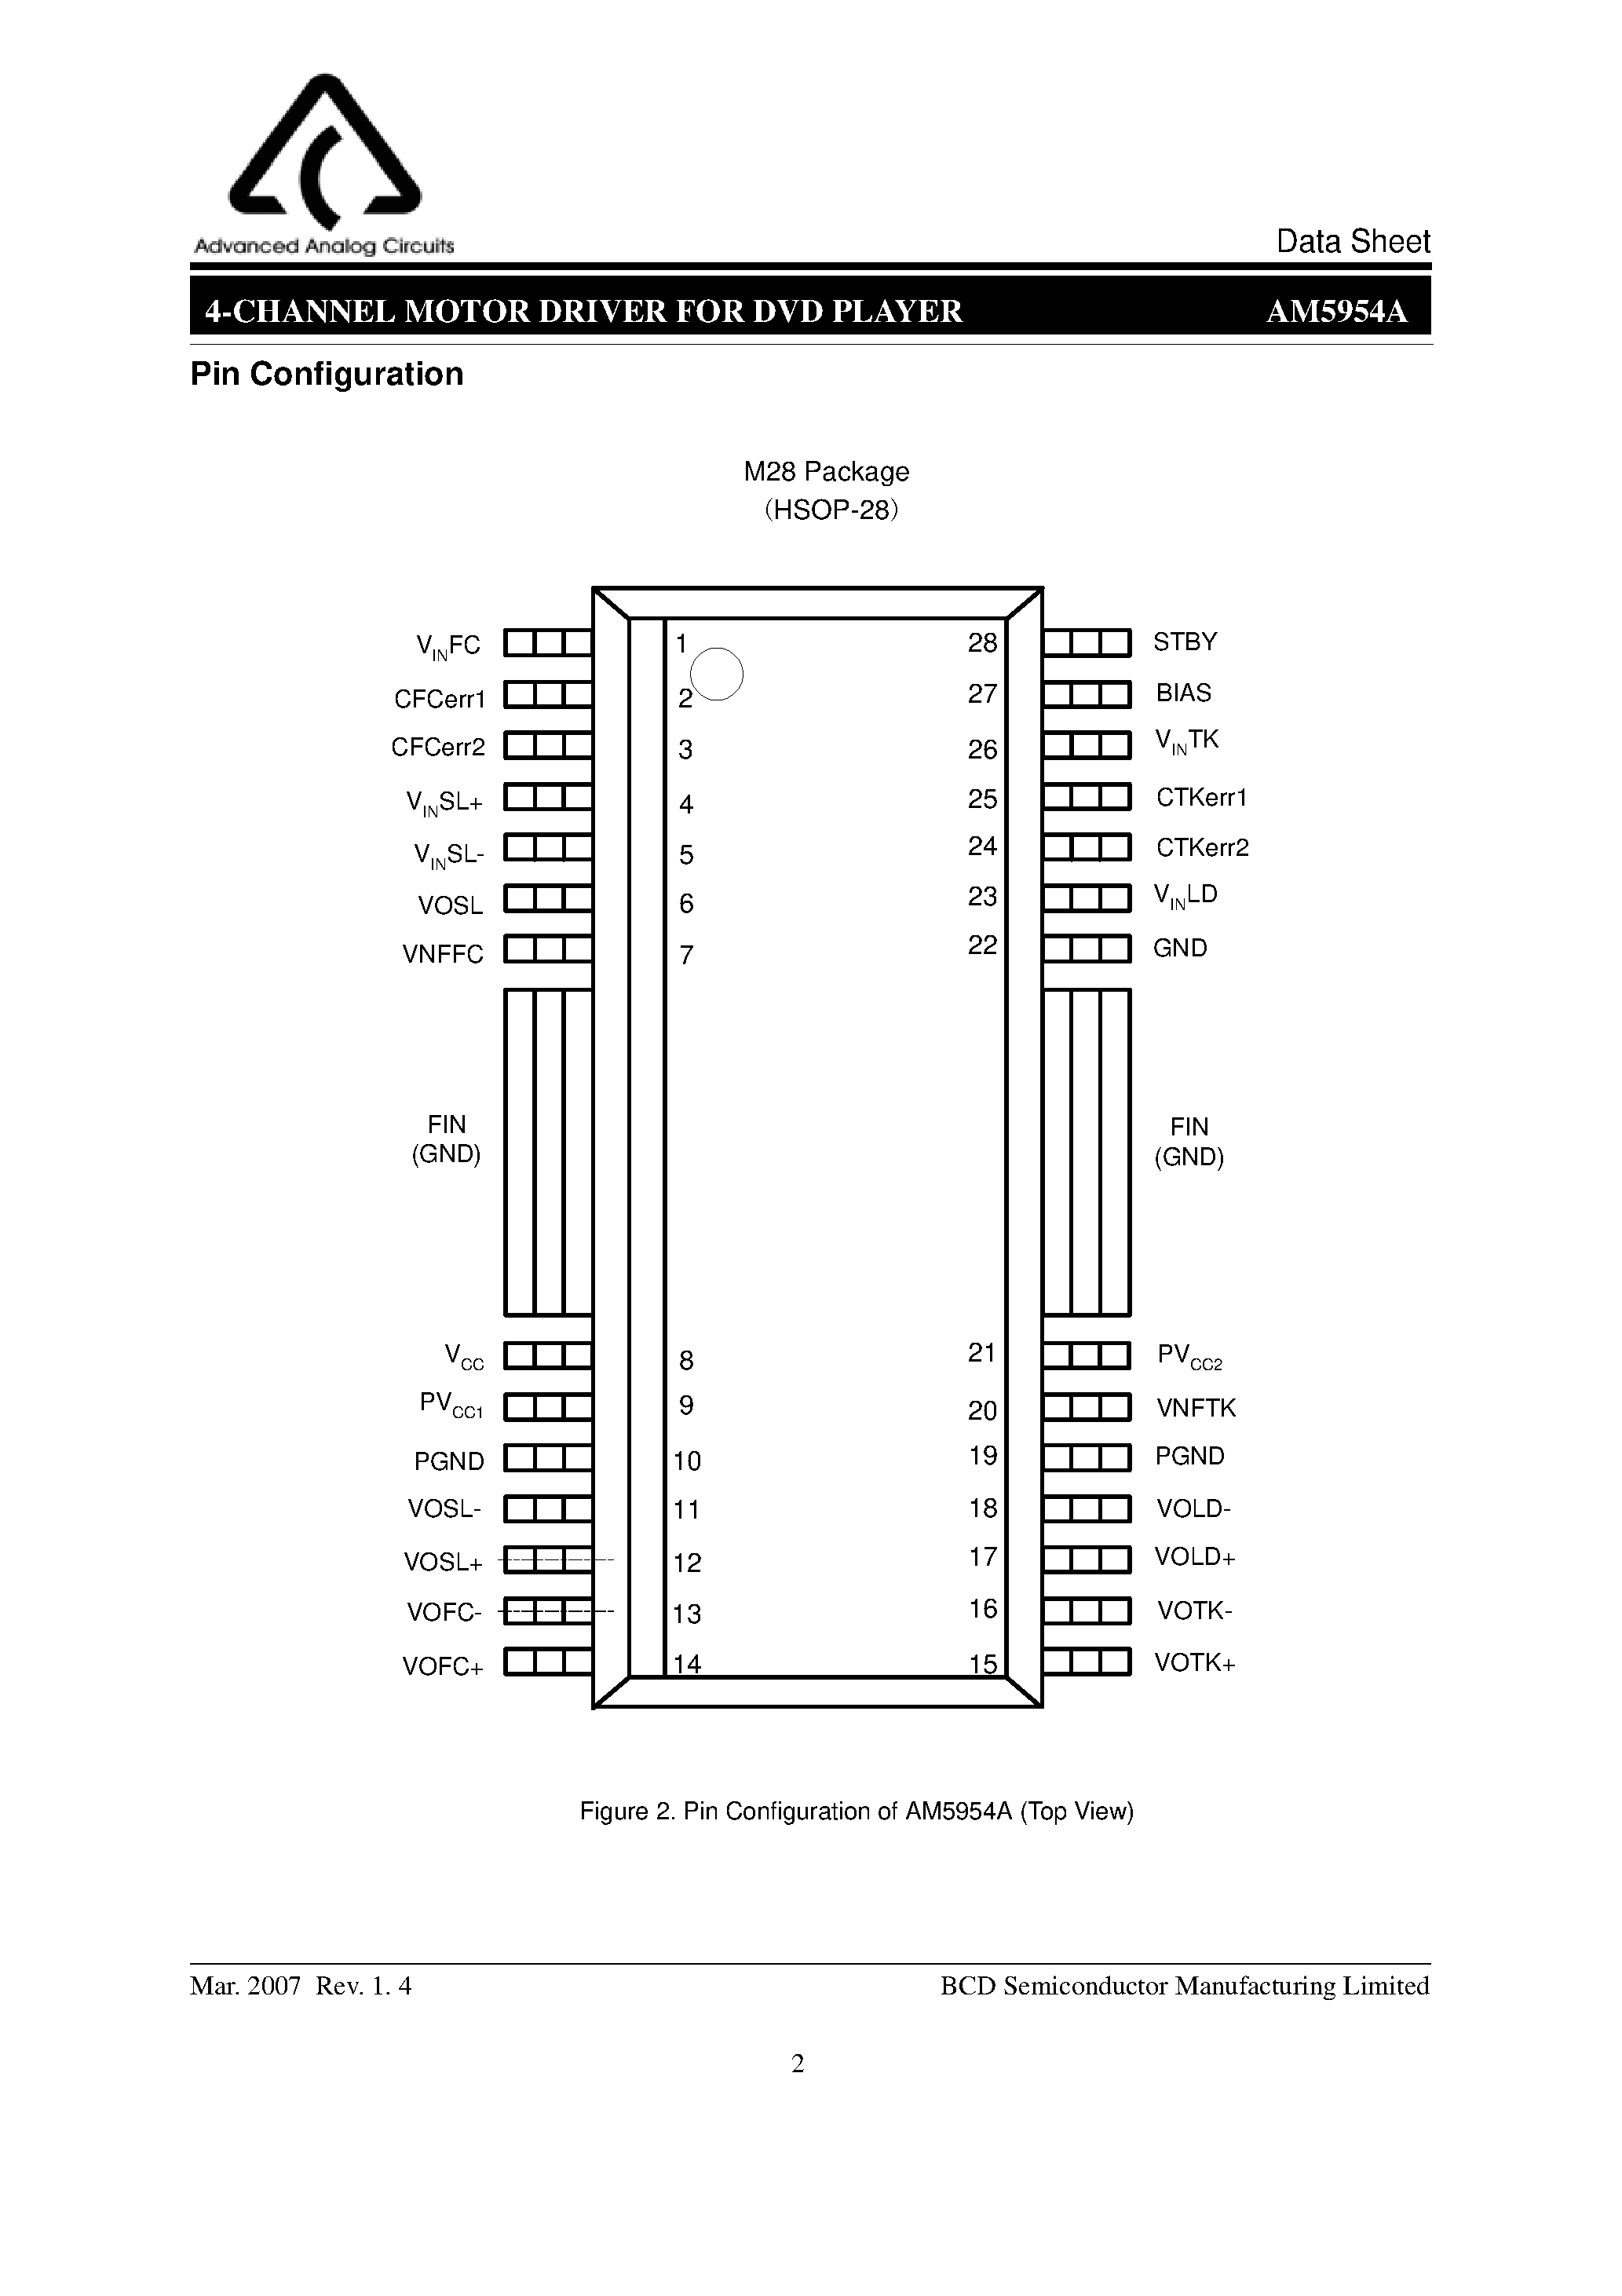 Datasheet AM5954A - 4-CHANNEL MOTOR DRIVER page 2